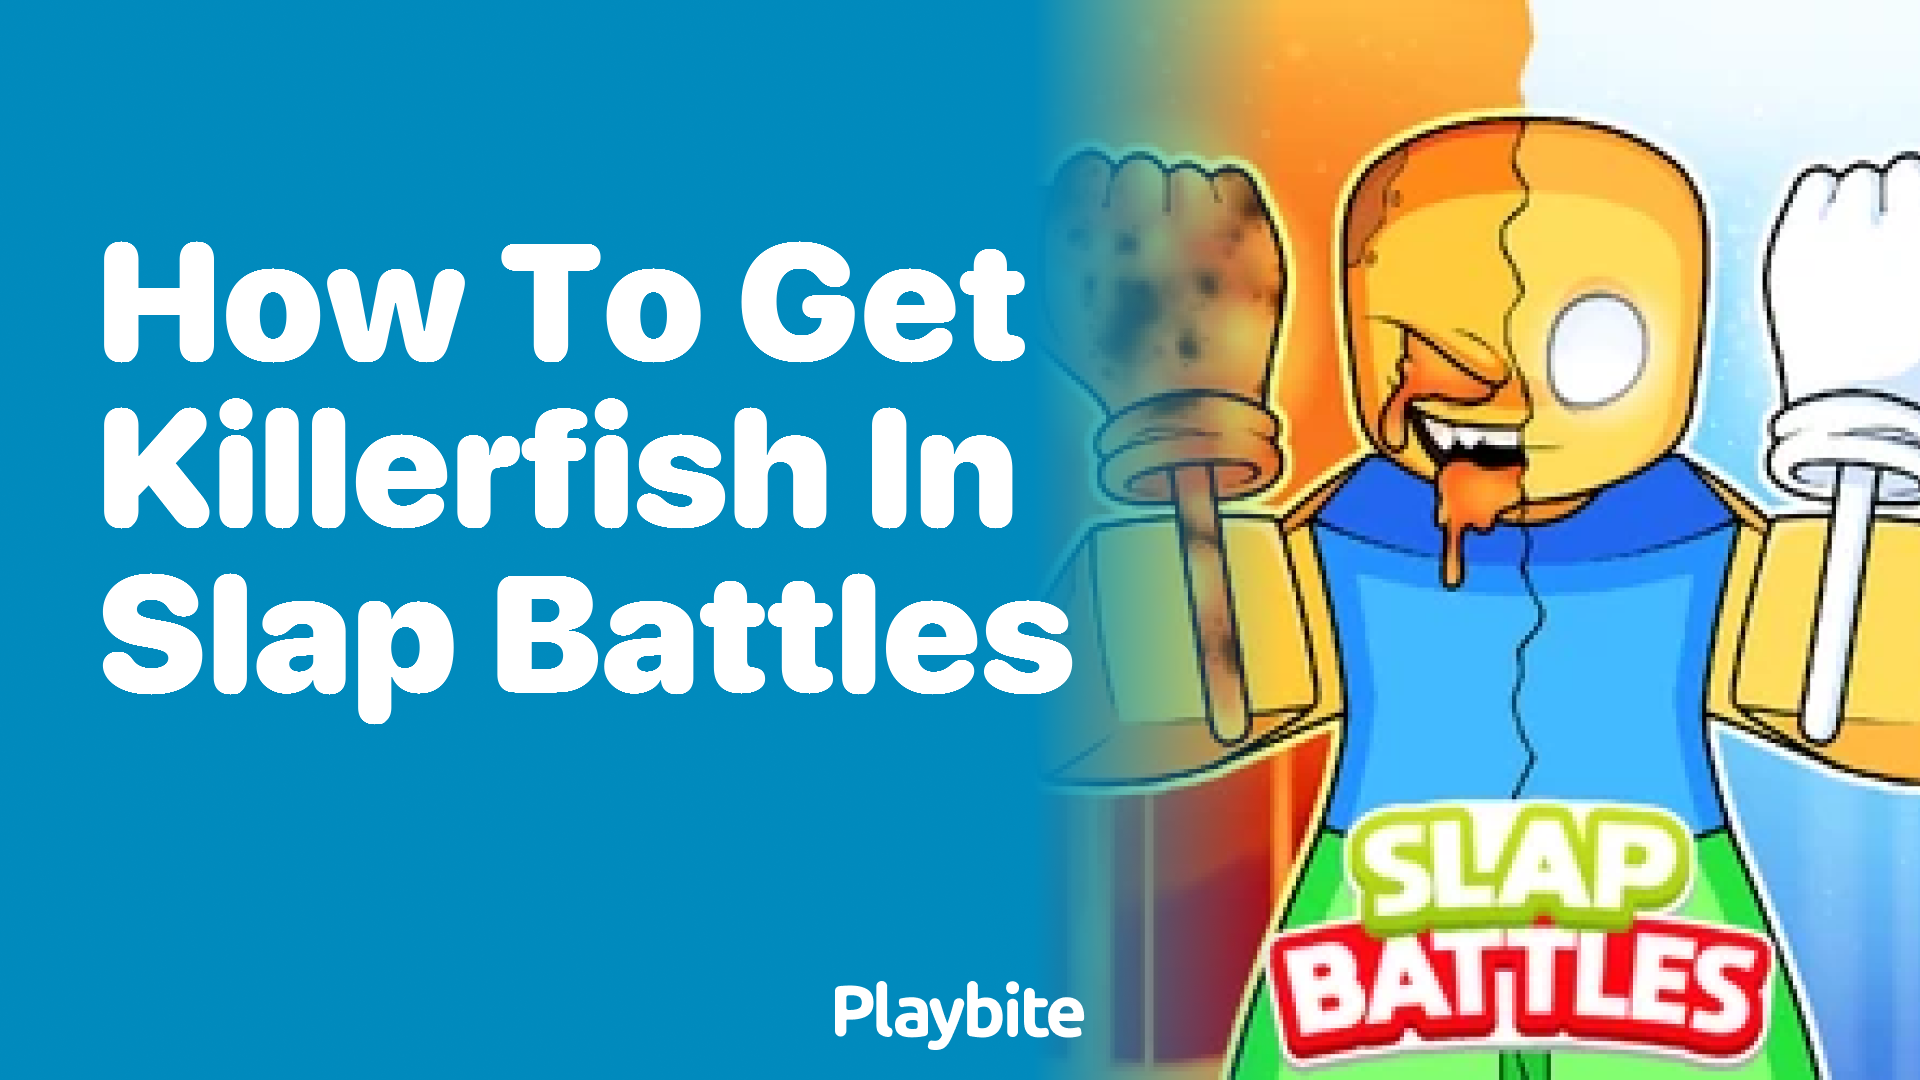 Can You Get the Fish Glove in Private Servers on Slap Battles? - Playbite